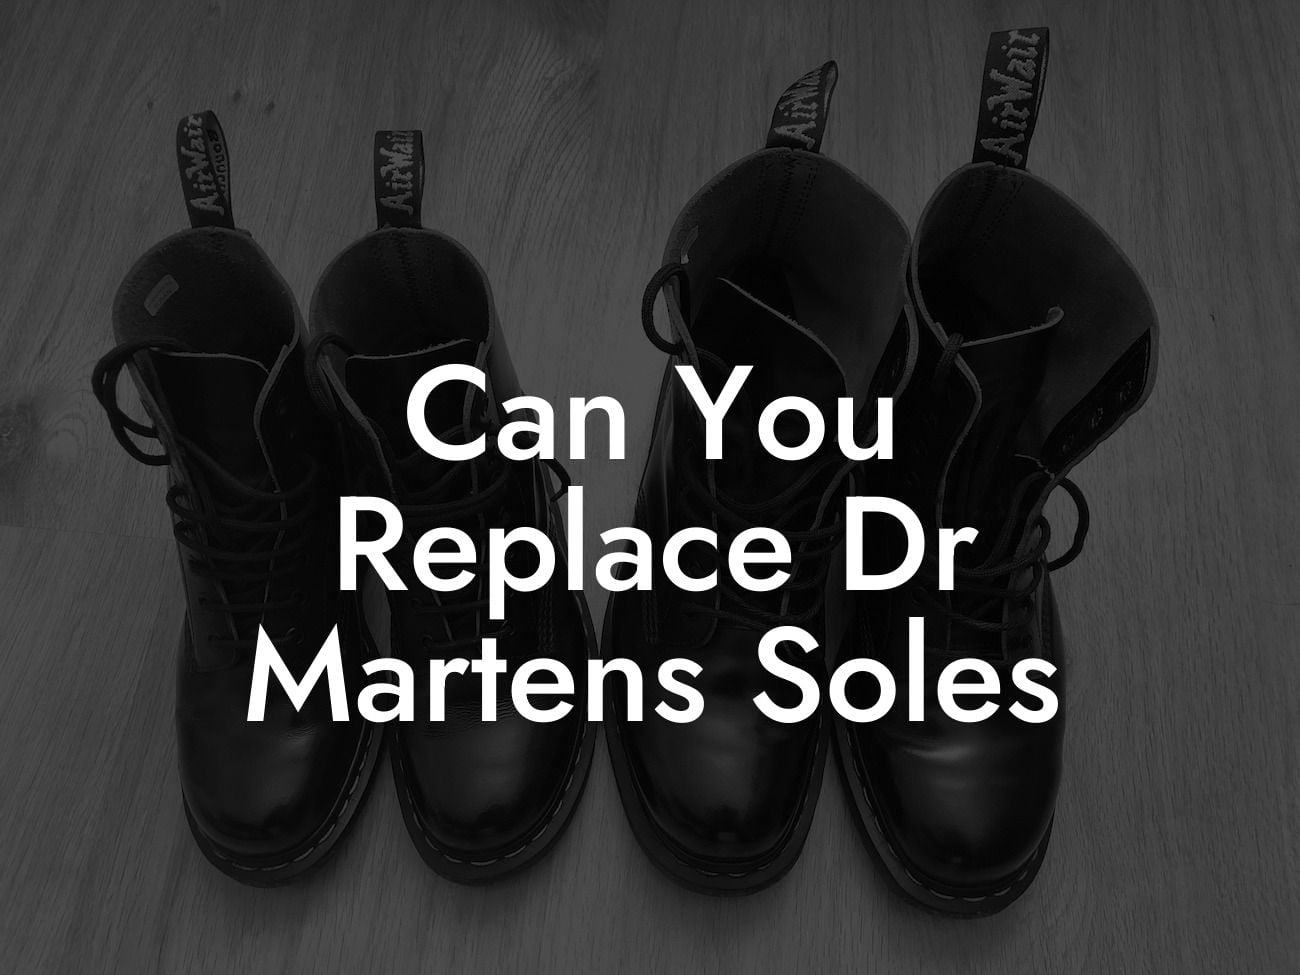 Can You Replace Dr Martens Soles